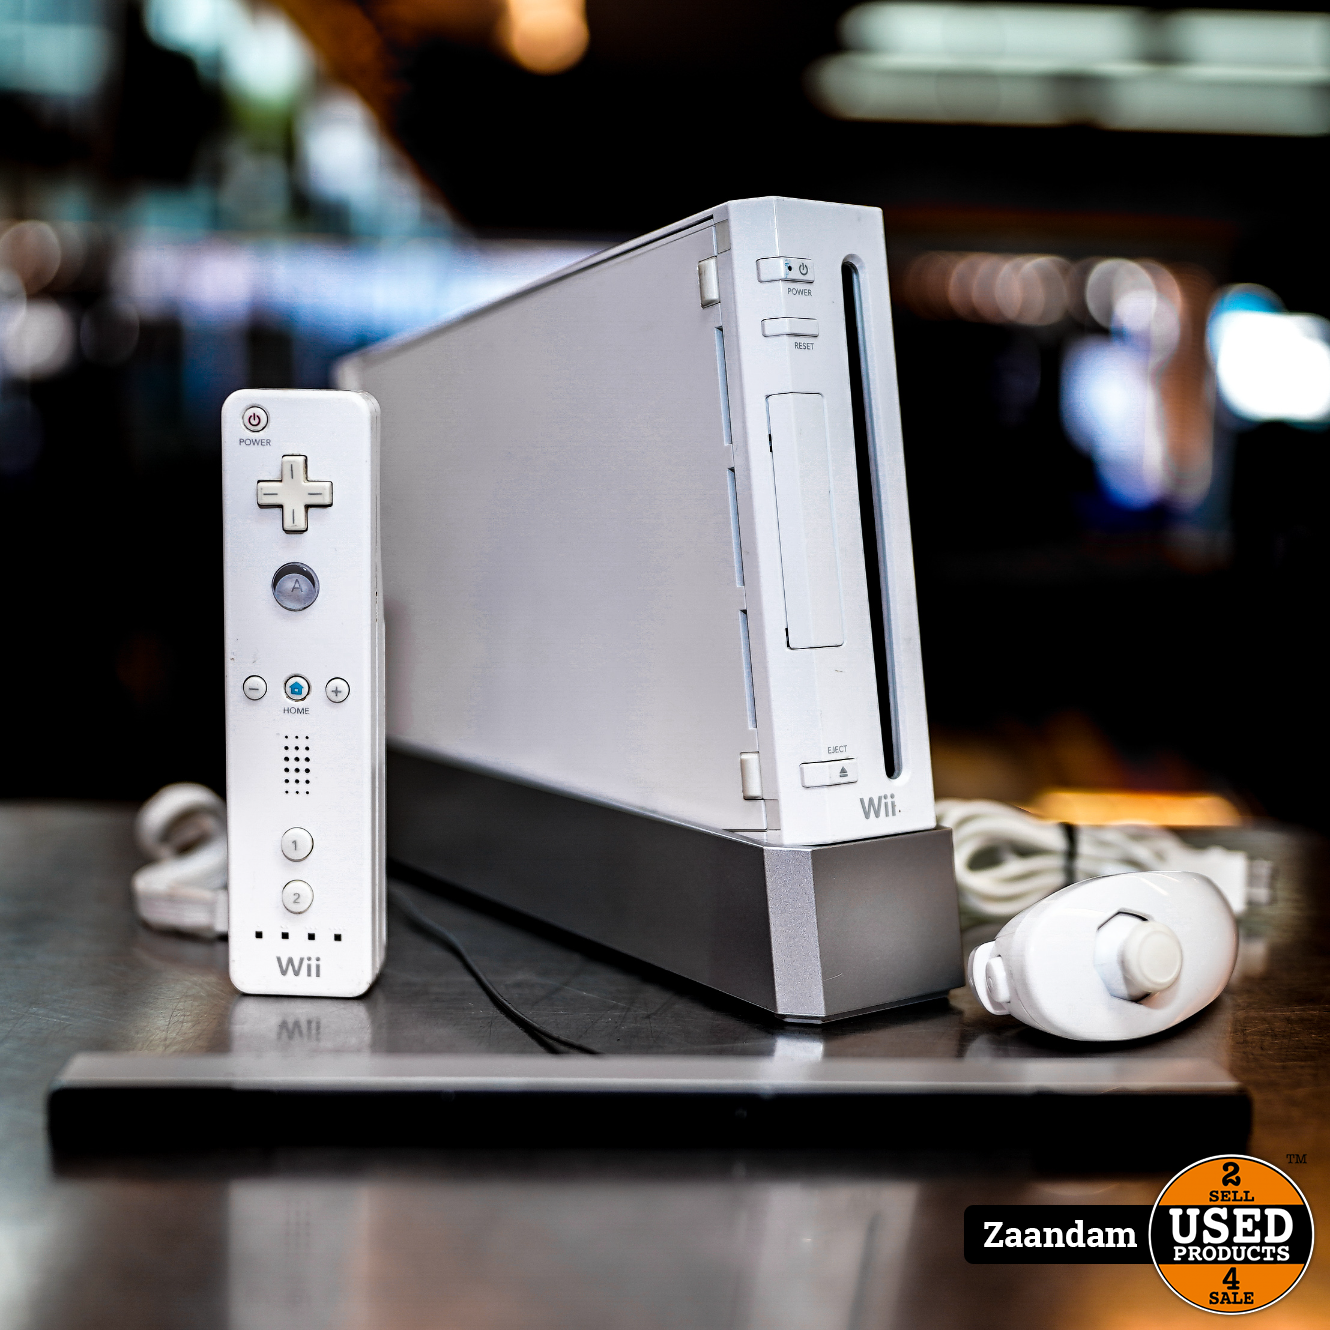 Nintendo Wii Console Wit | In nette staat - Used Products Zaandam